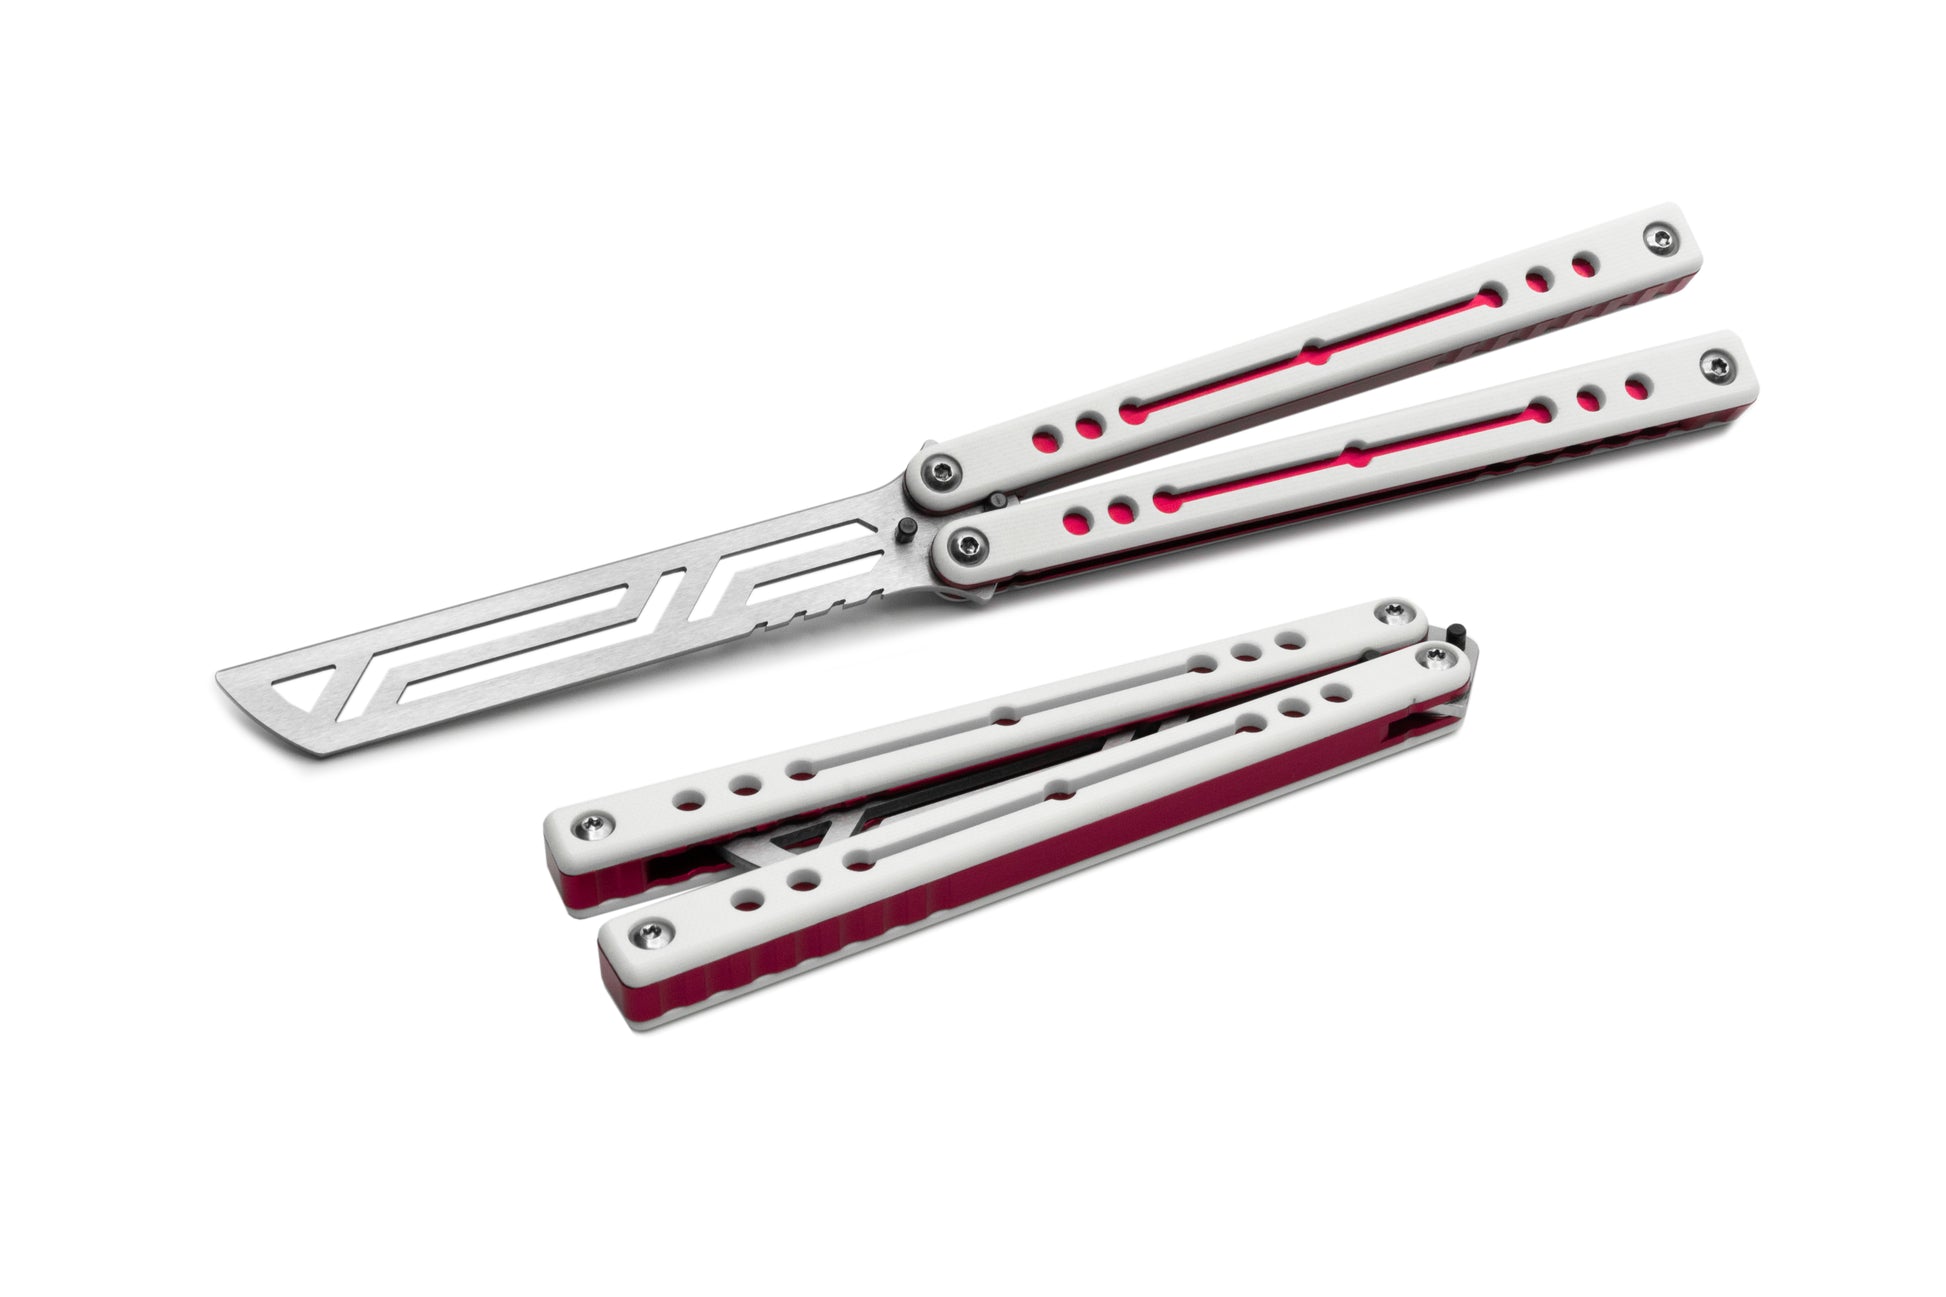 Winter Red NautilusV2 balisong with g10 scales